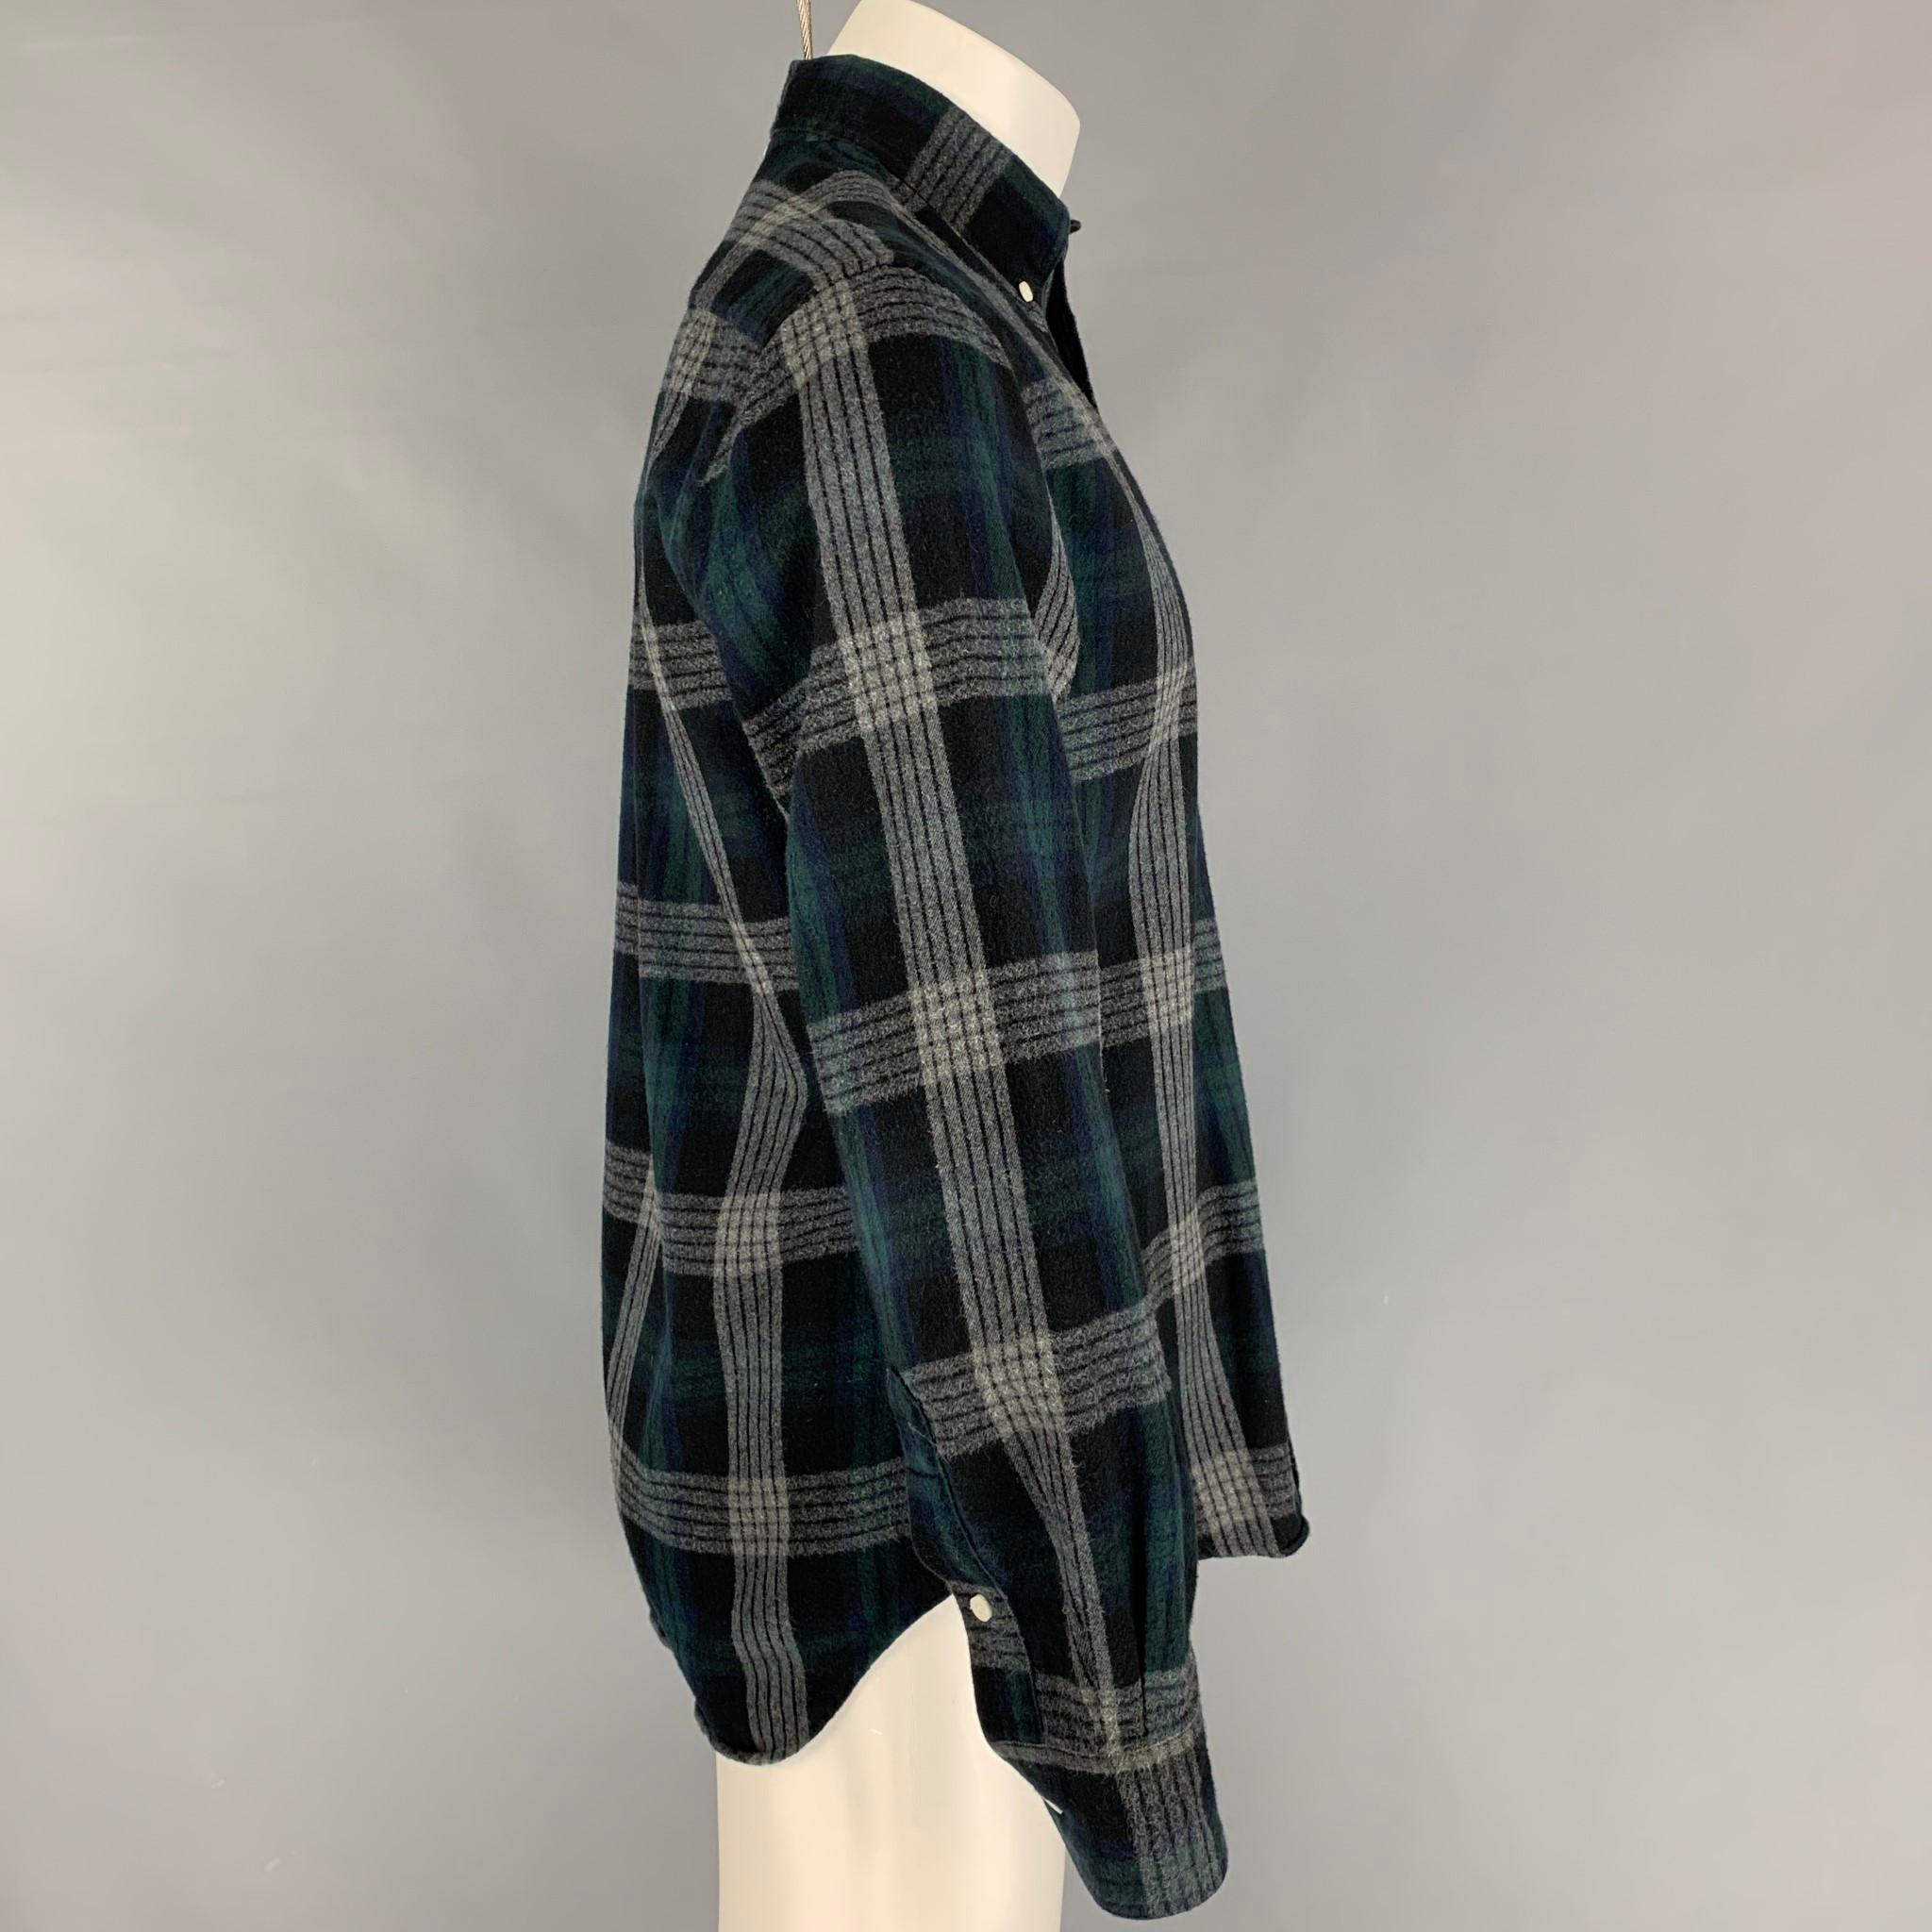 GITMAN BROS long sleeve shirt comes in a grey & green plaid cotton featuring a button down collar, patch pocket, and a buttoned closure. Made in USA. 

Very Good Pre-Owned Condition.
Marked: M

Measurements:

Shoulder: 17.5 in.
Chest: 40 in.
Sleeve: